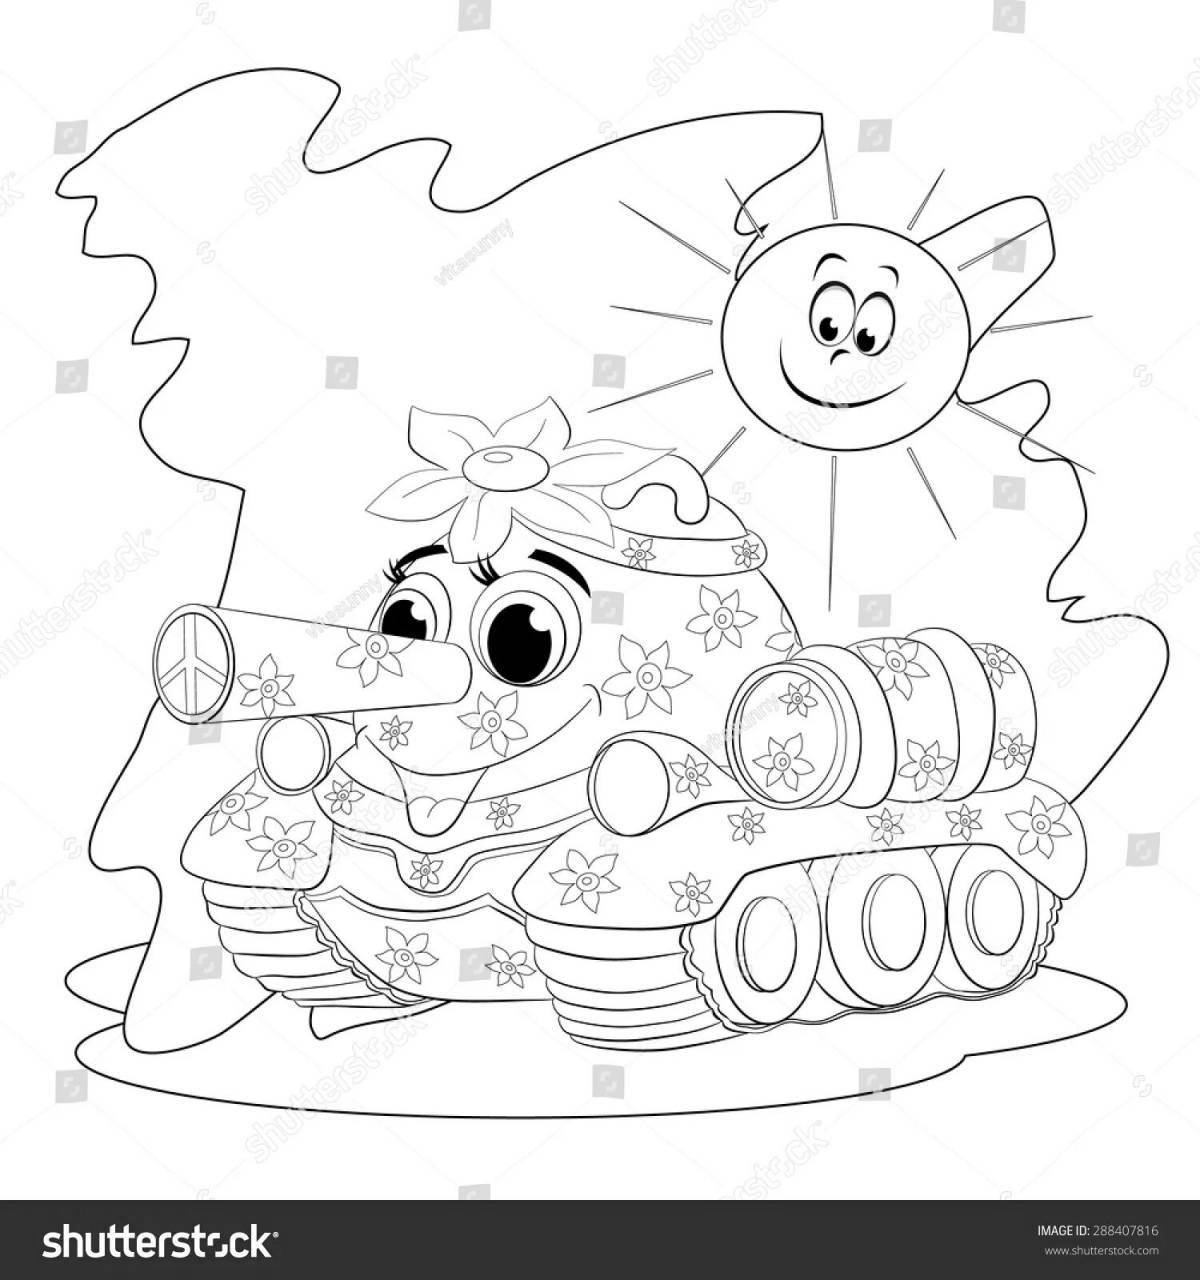 Great tank cartoon coloring book for kids